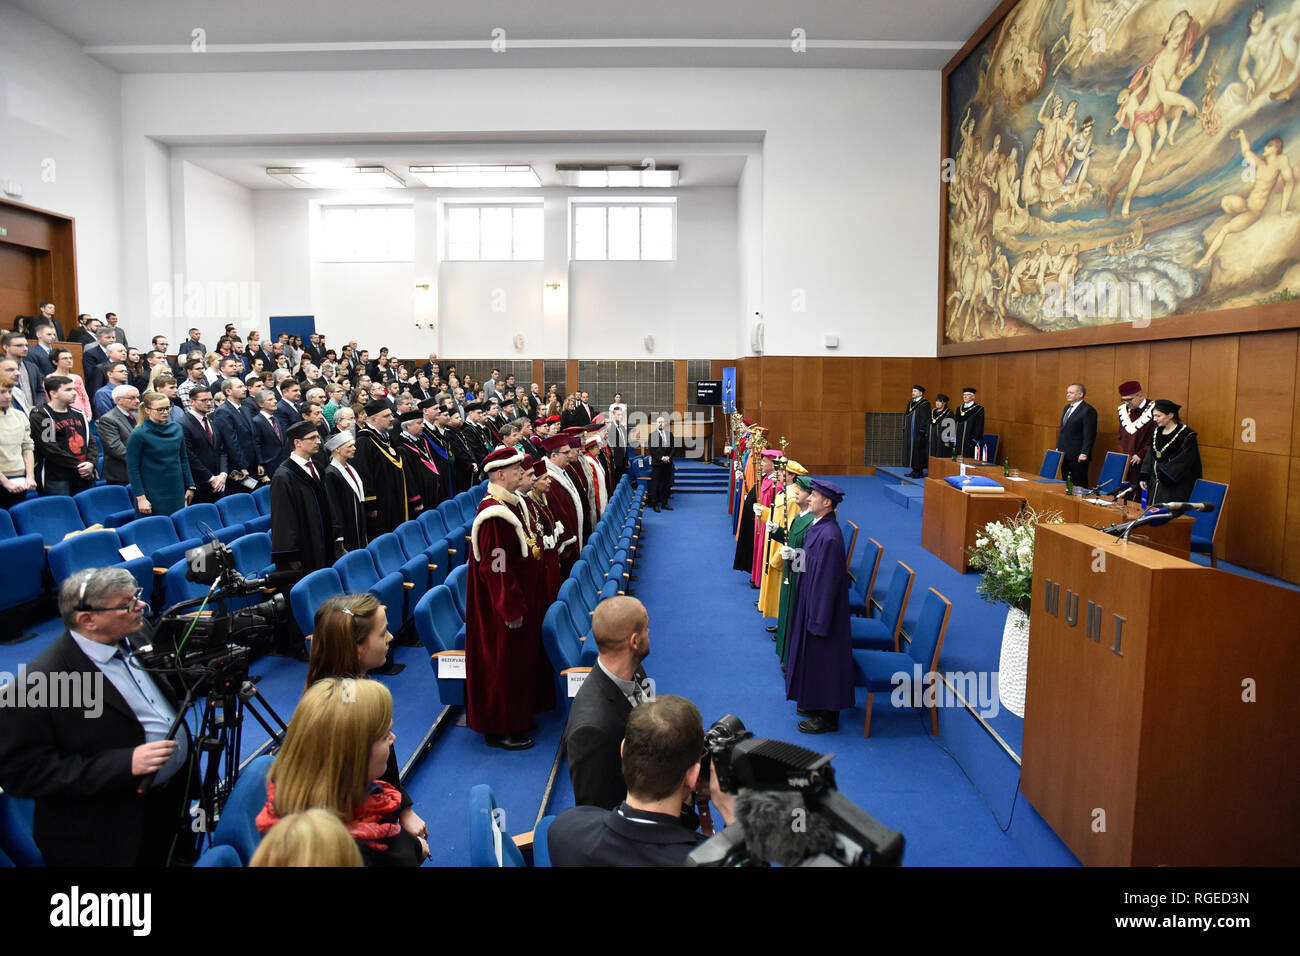 Slovak President Andrej Kiska (3rd right) criticises university financing based on number of students after receiving the Great Gold Medal of Brno's Masaryk University on the 100th anniversary of its establishment during the debate with students in Brno, Czech Republic, January 29, 2019. (CTK Photo/Vaclav Salek) Stock Photo